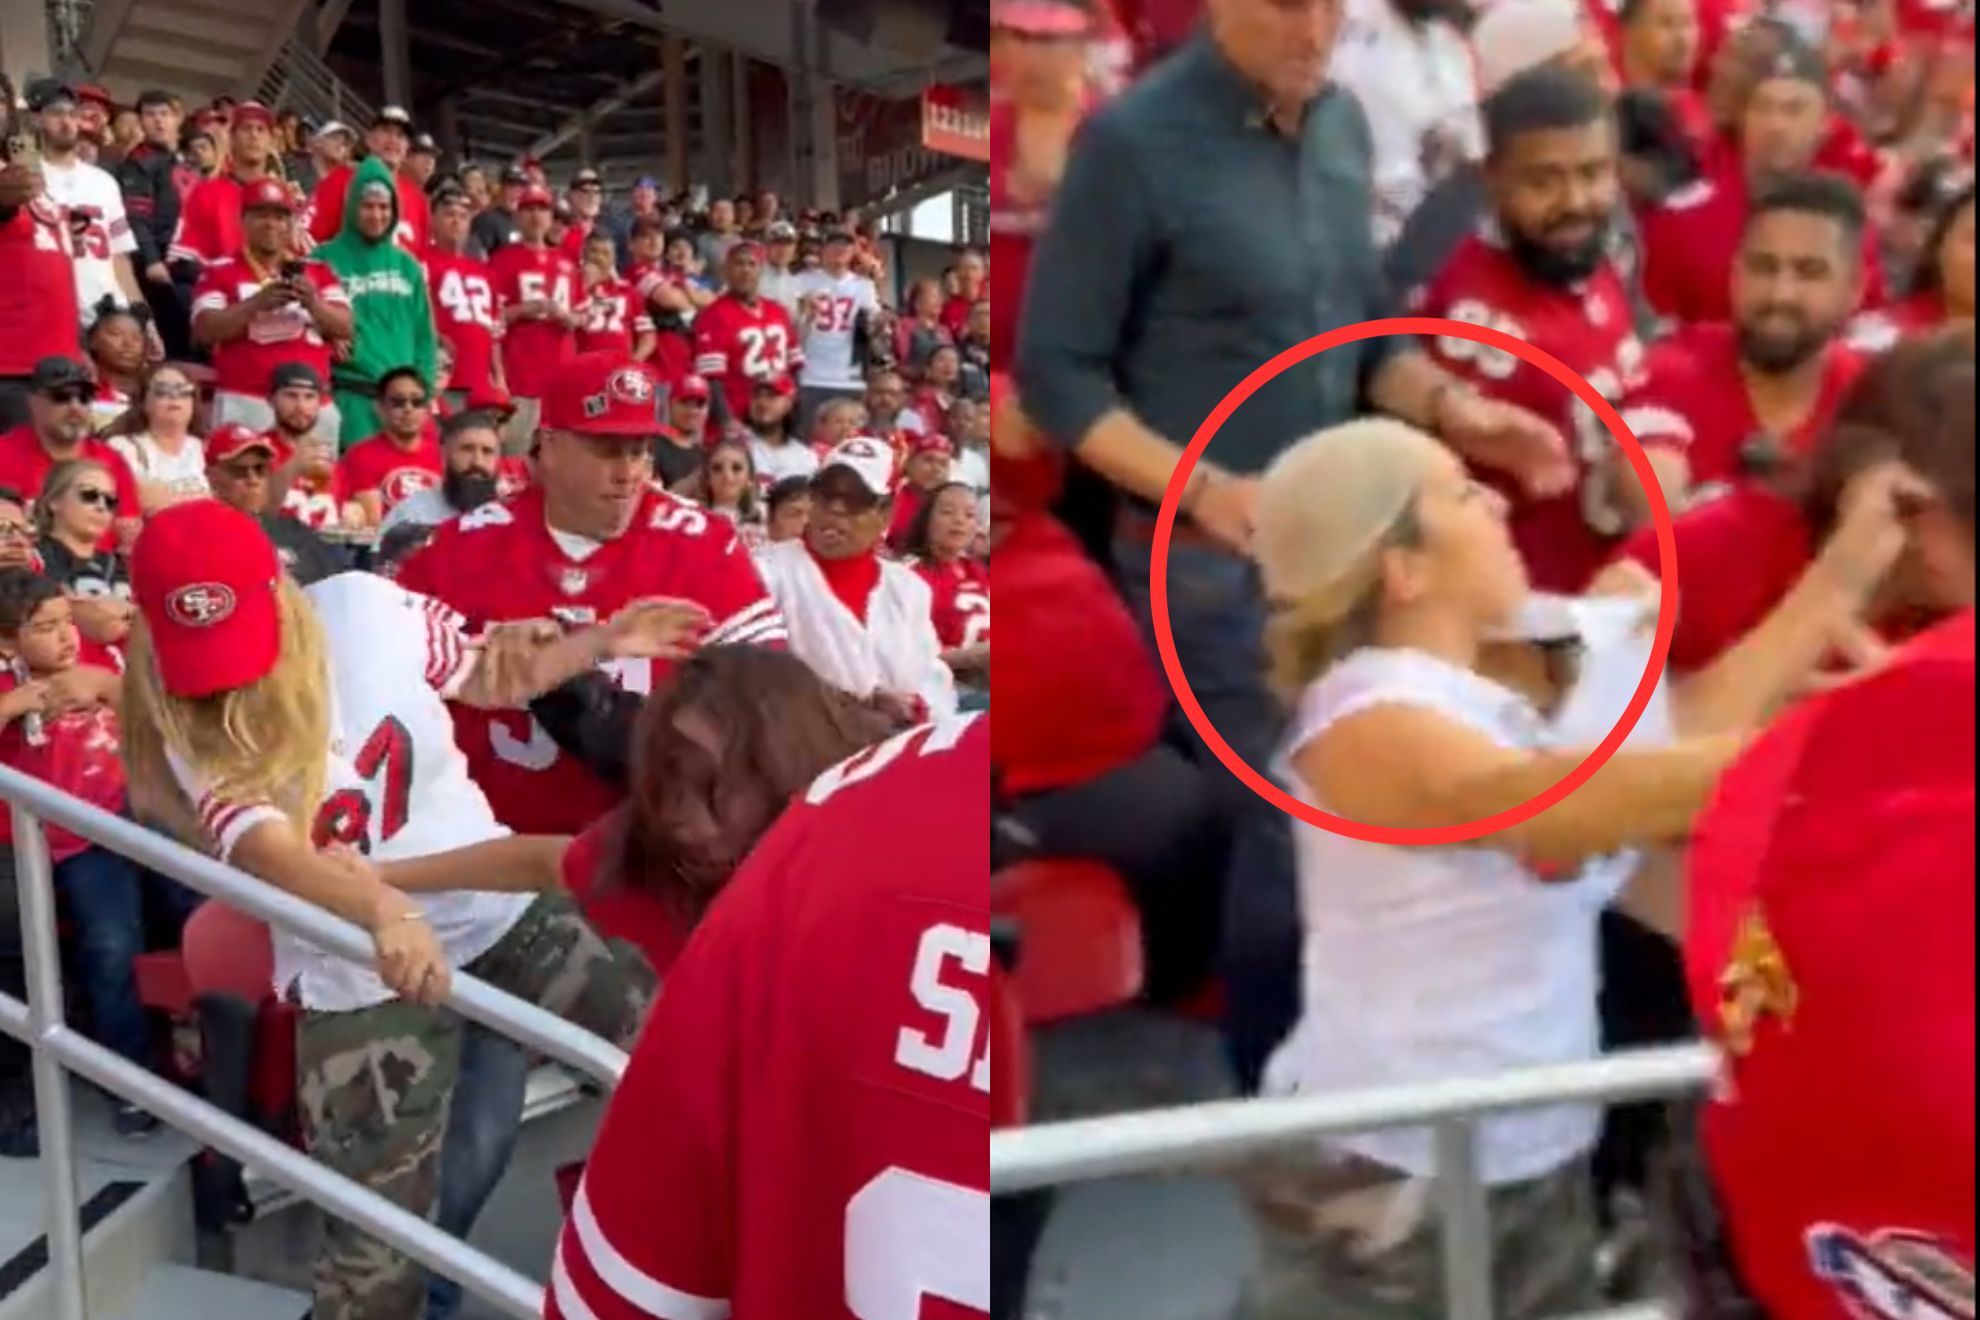 A female fan's wig flies off during the latest NFL brawl at Levi's Stadium during Thursday Night Football.